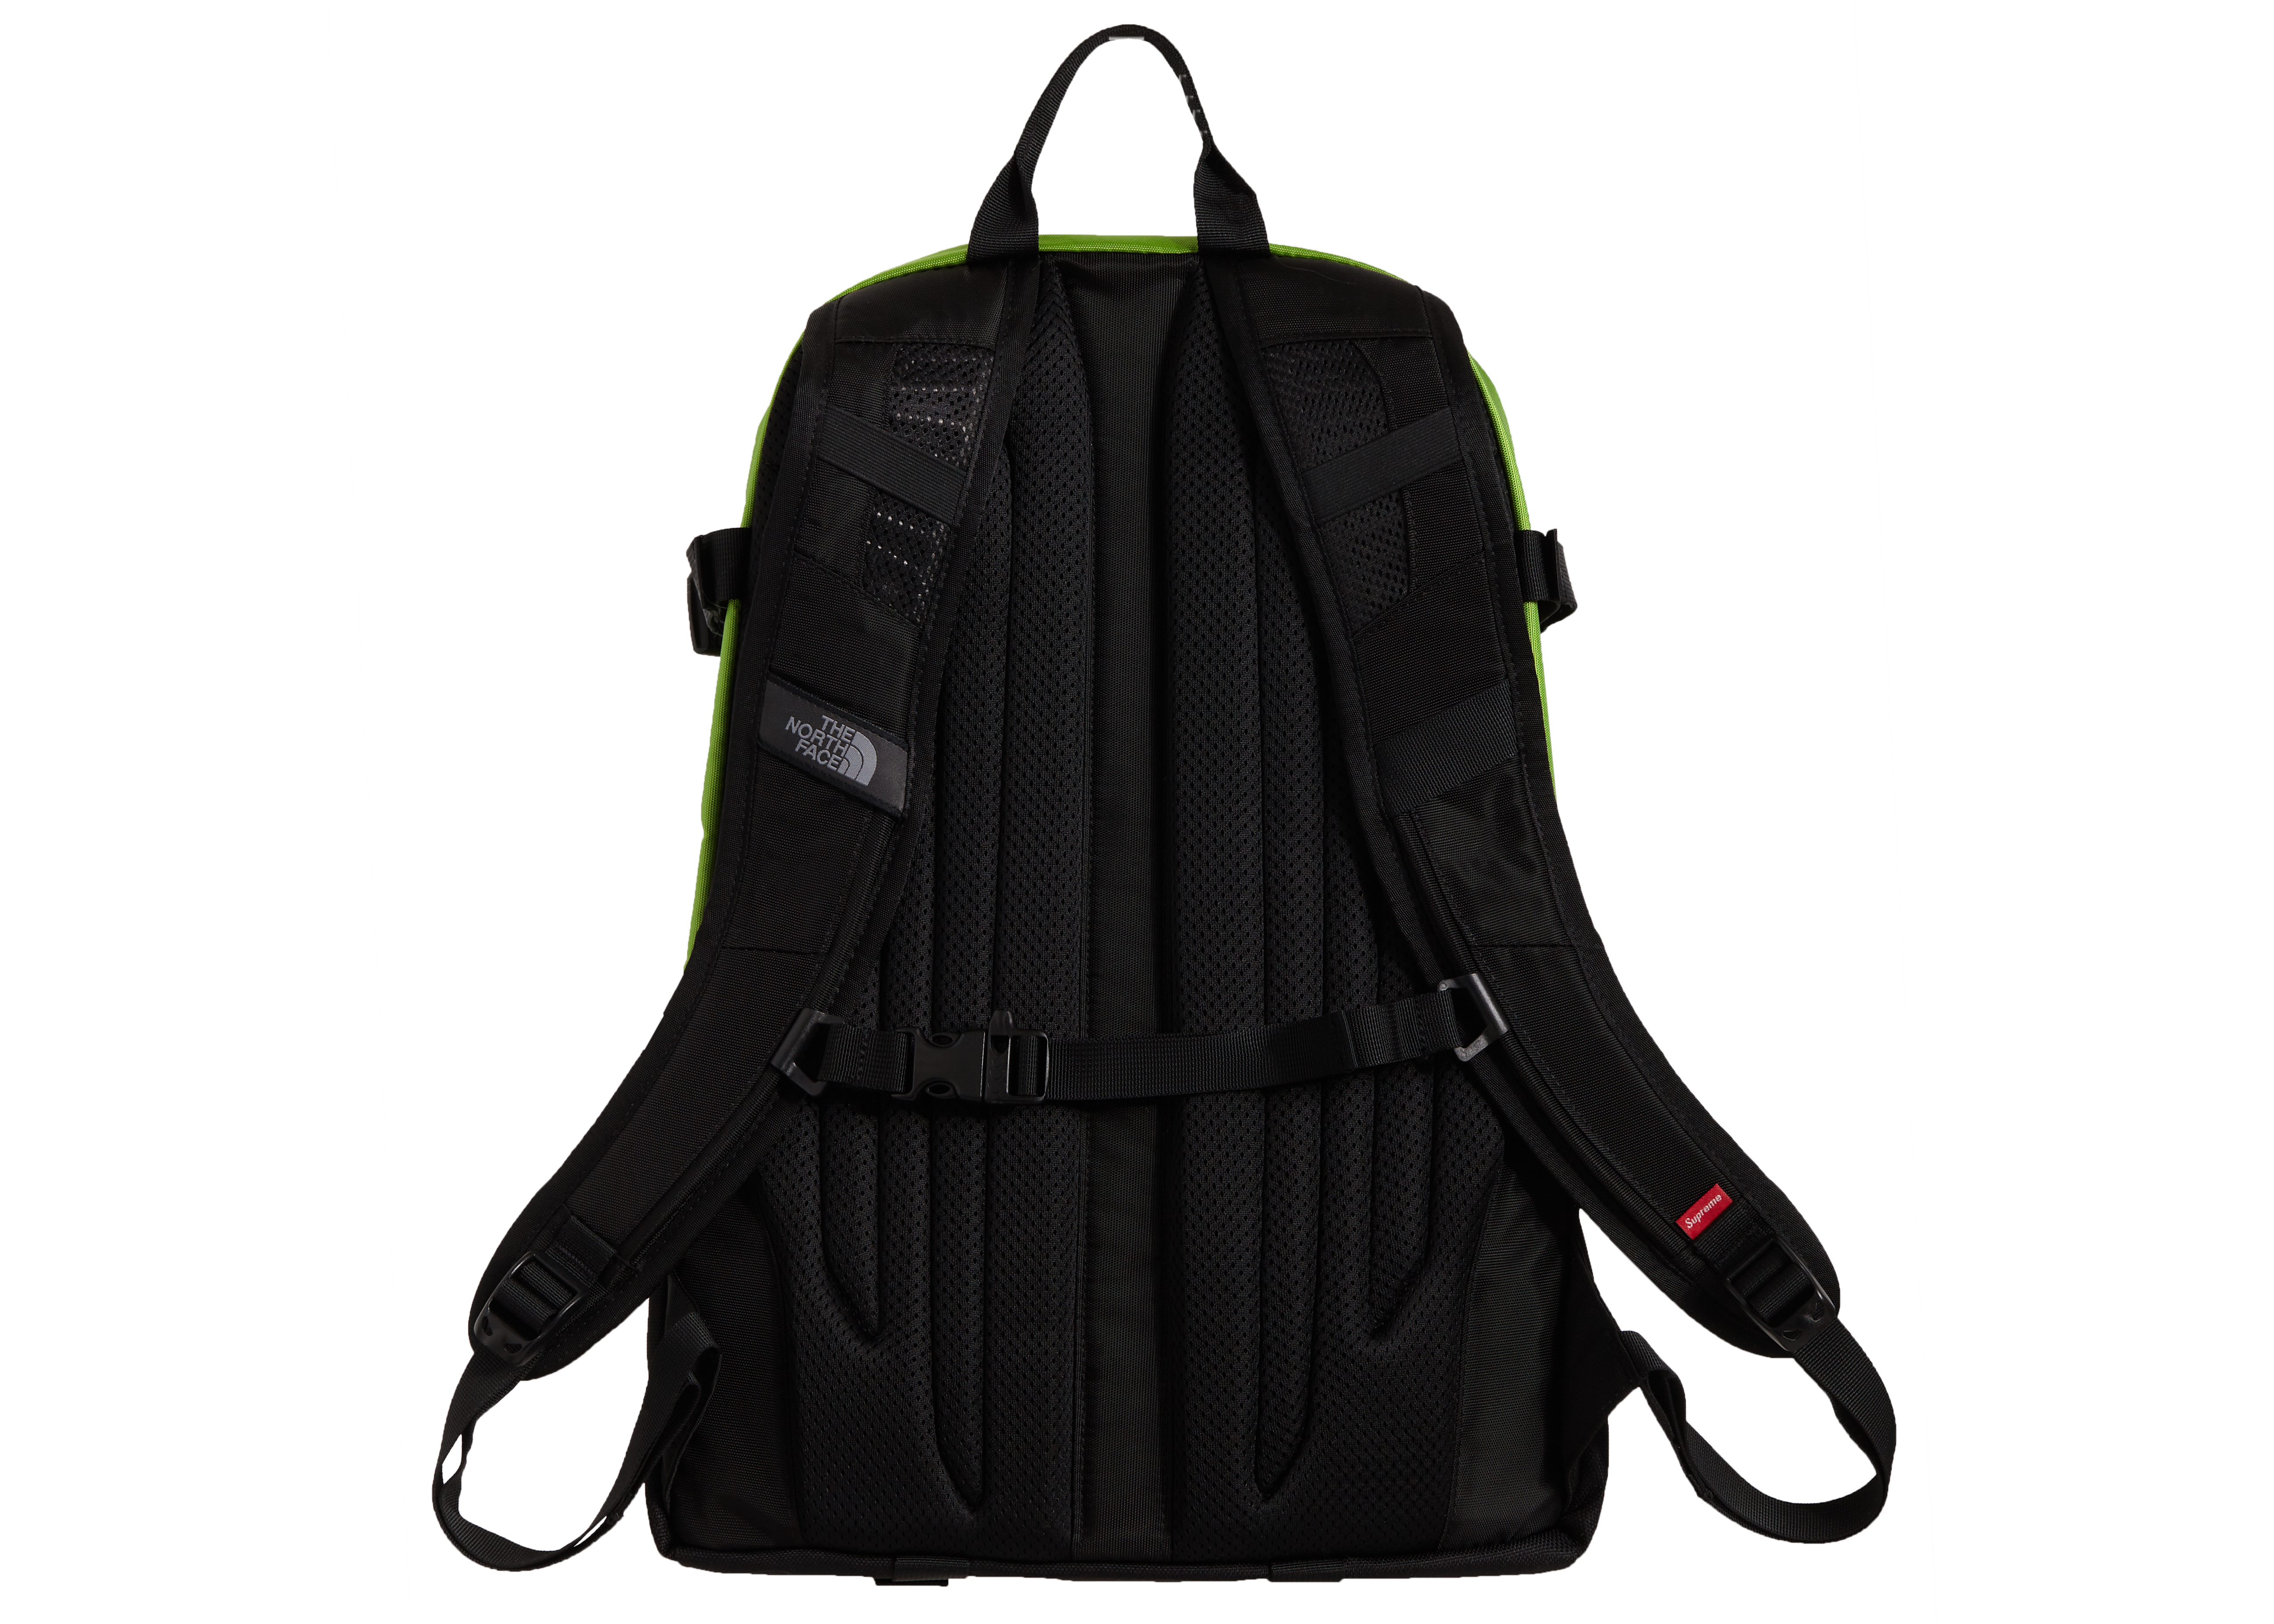 Supreme The North Face S Logo Expedition Backpack Lime - FW20 - US